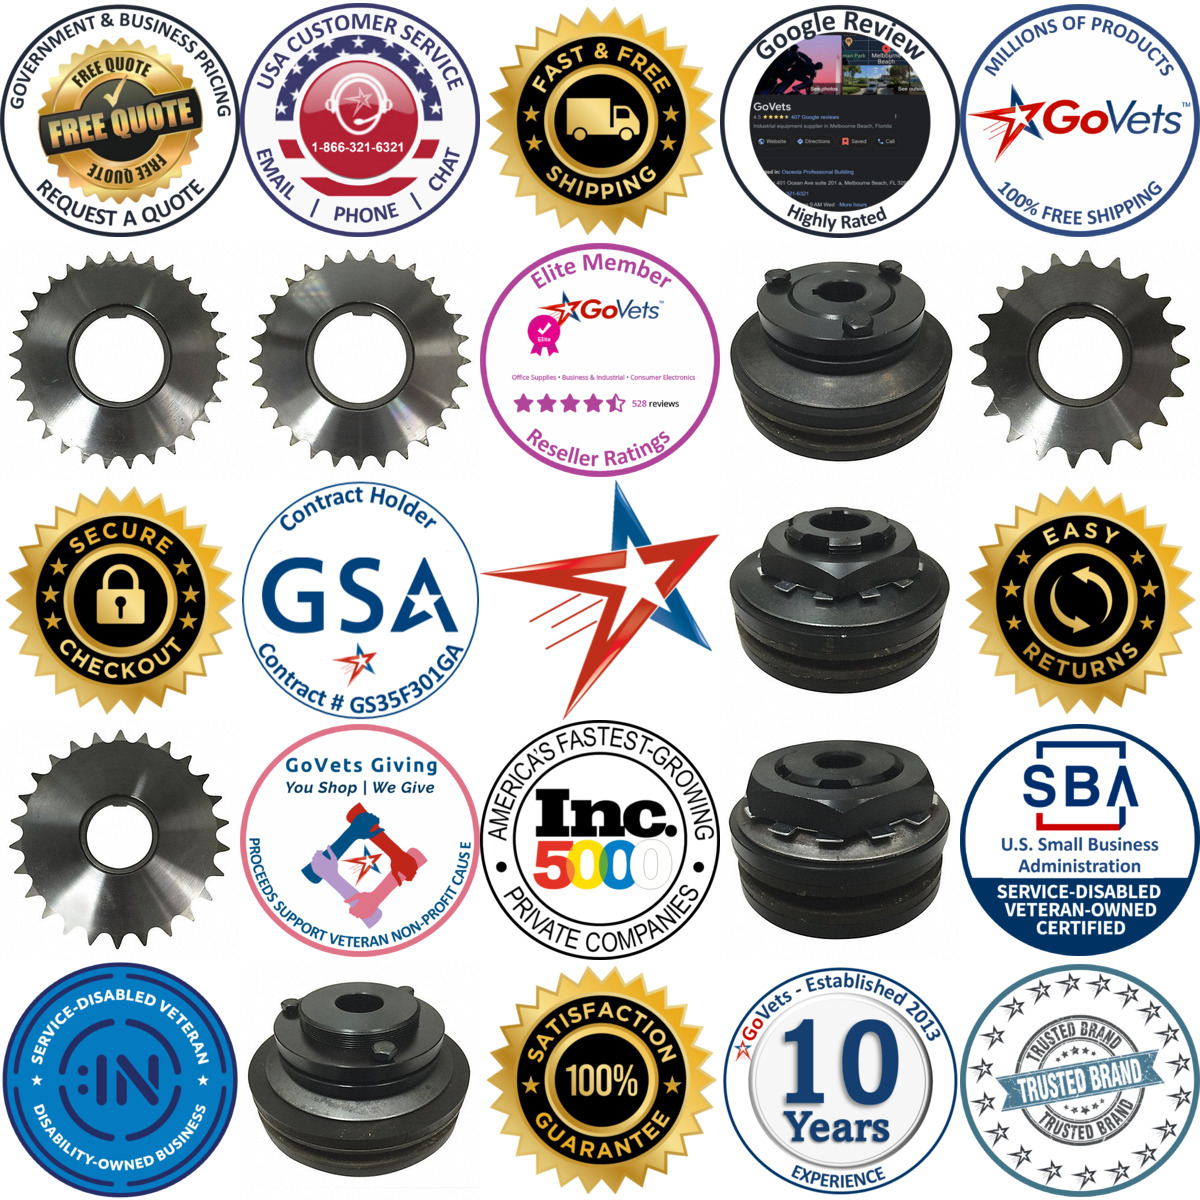 A selection of Conveyor Torque Limiters products on GoVets